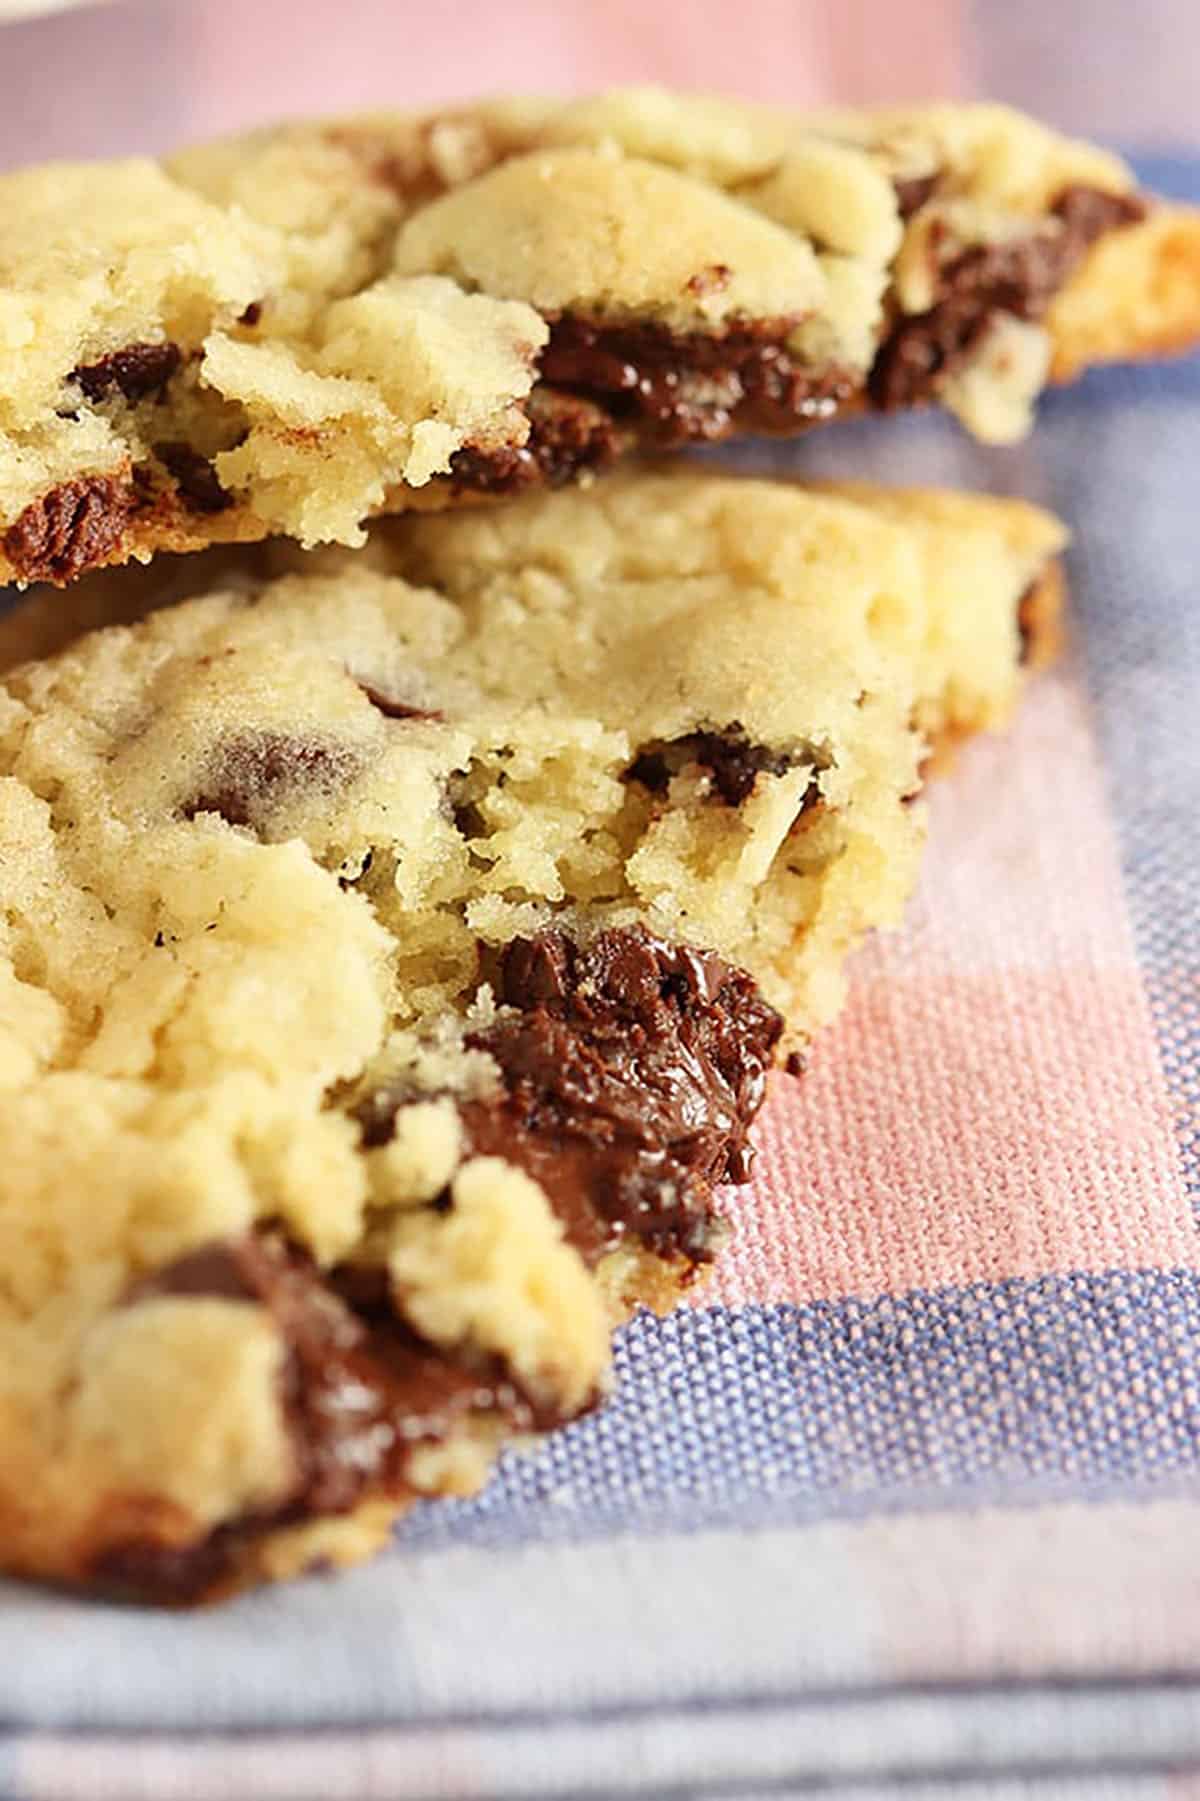 blue ribbon winning chocolate chip cookie broken in half with a melty chocolate chip shown close up.